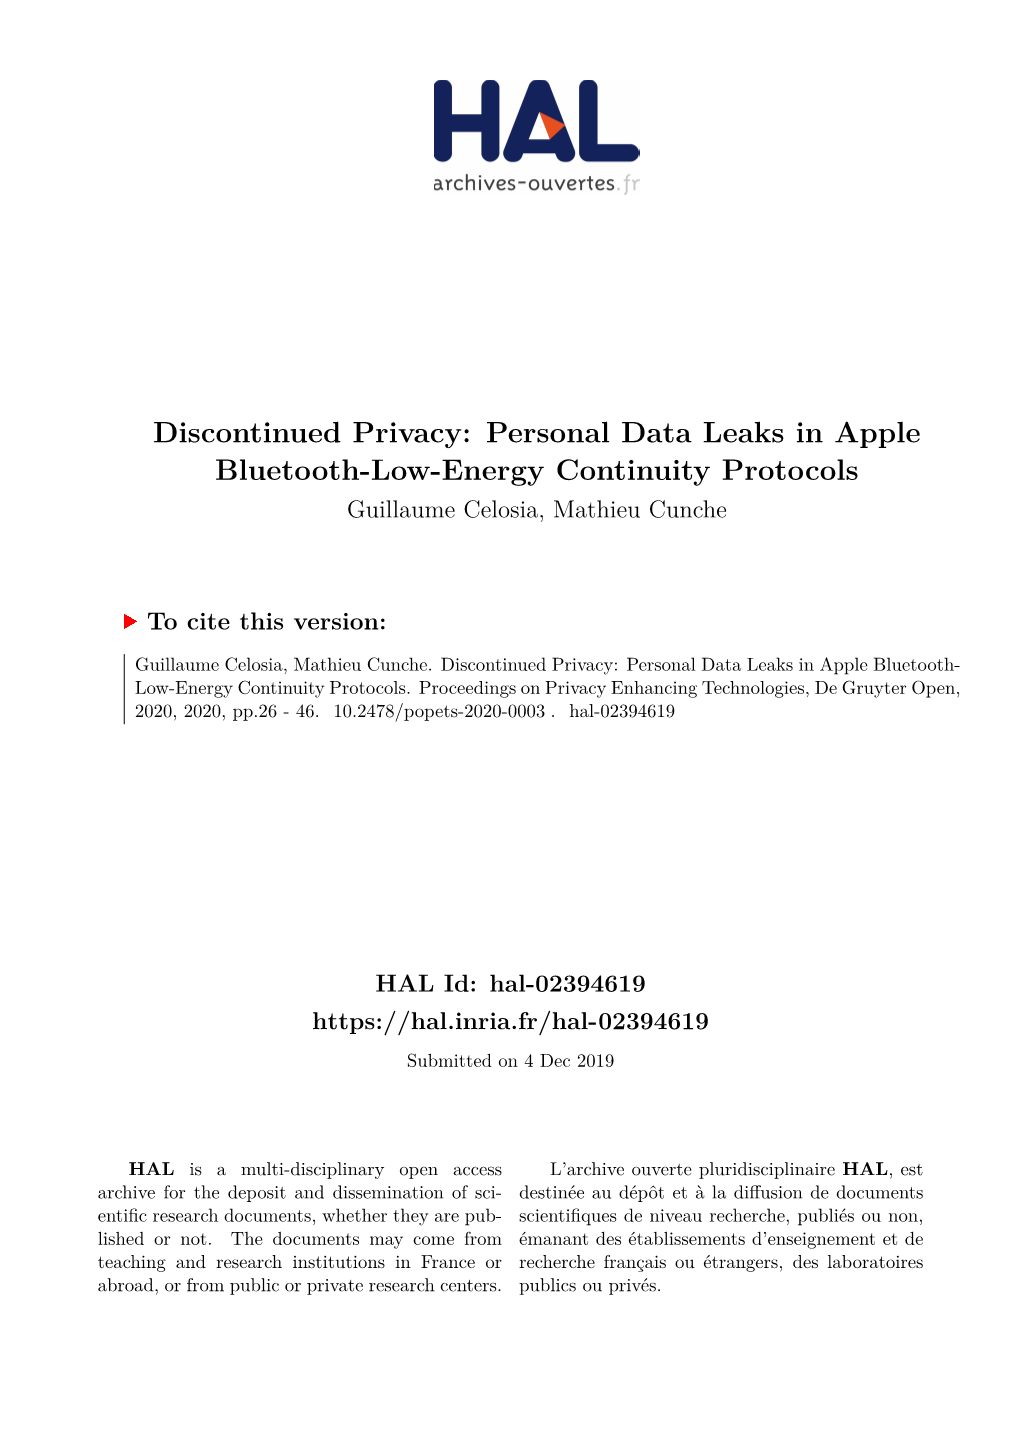 Personal Data Leaks in Apple Bluetooth-Low-Energy Continuity Protocols Guillaume Celosia, Mathieu Cunche